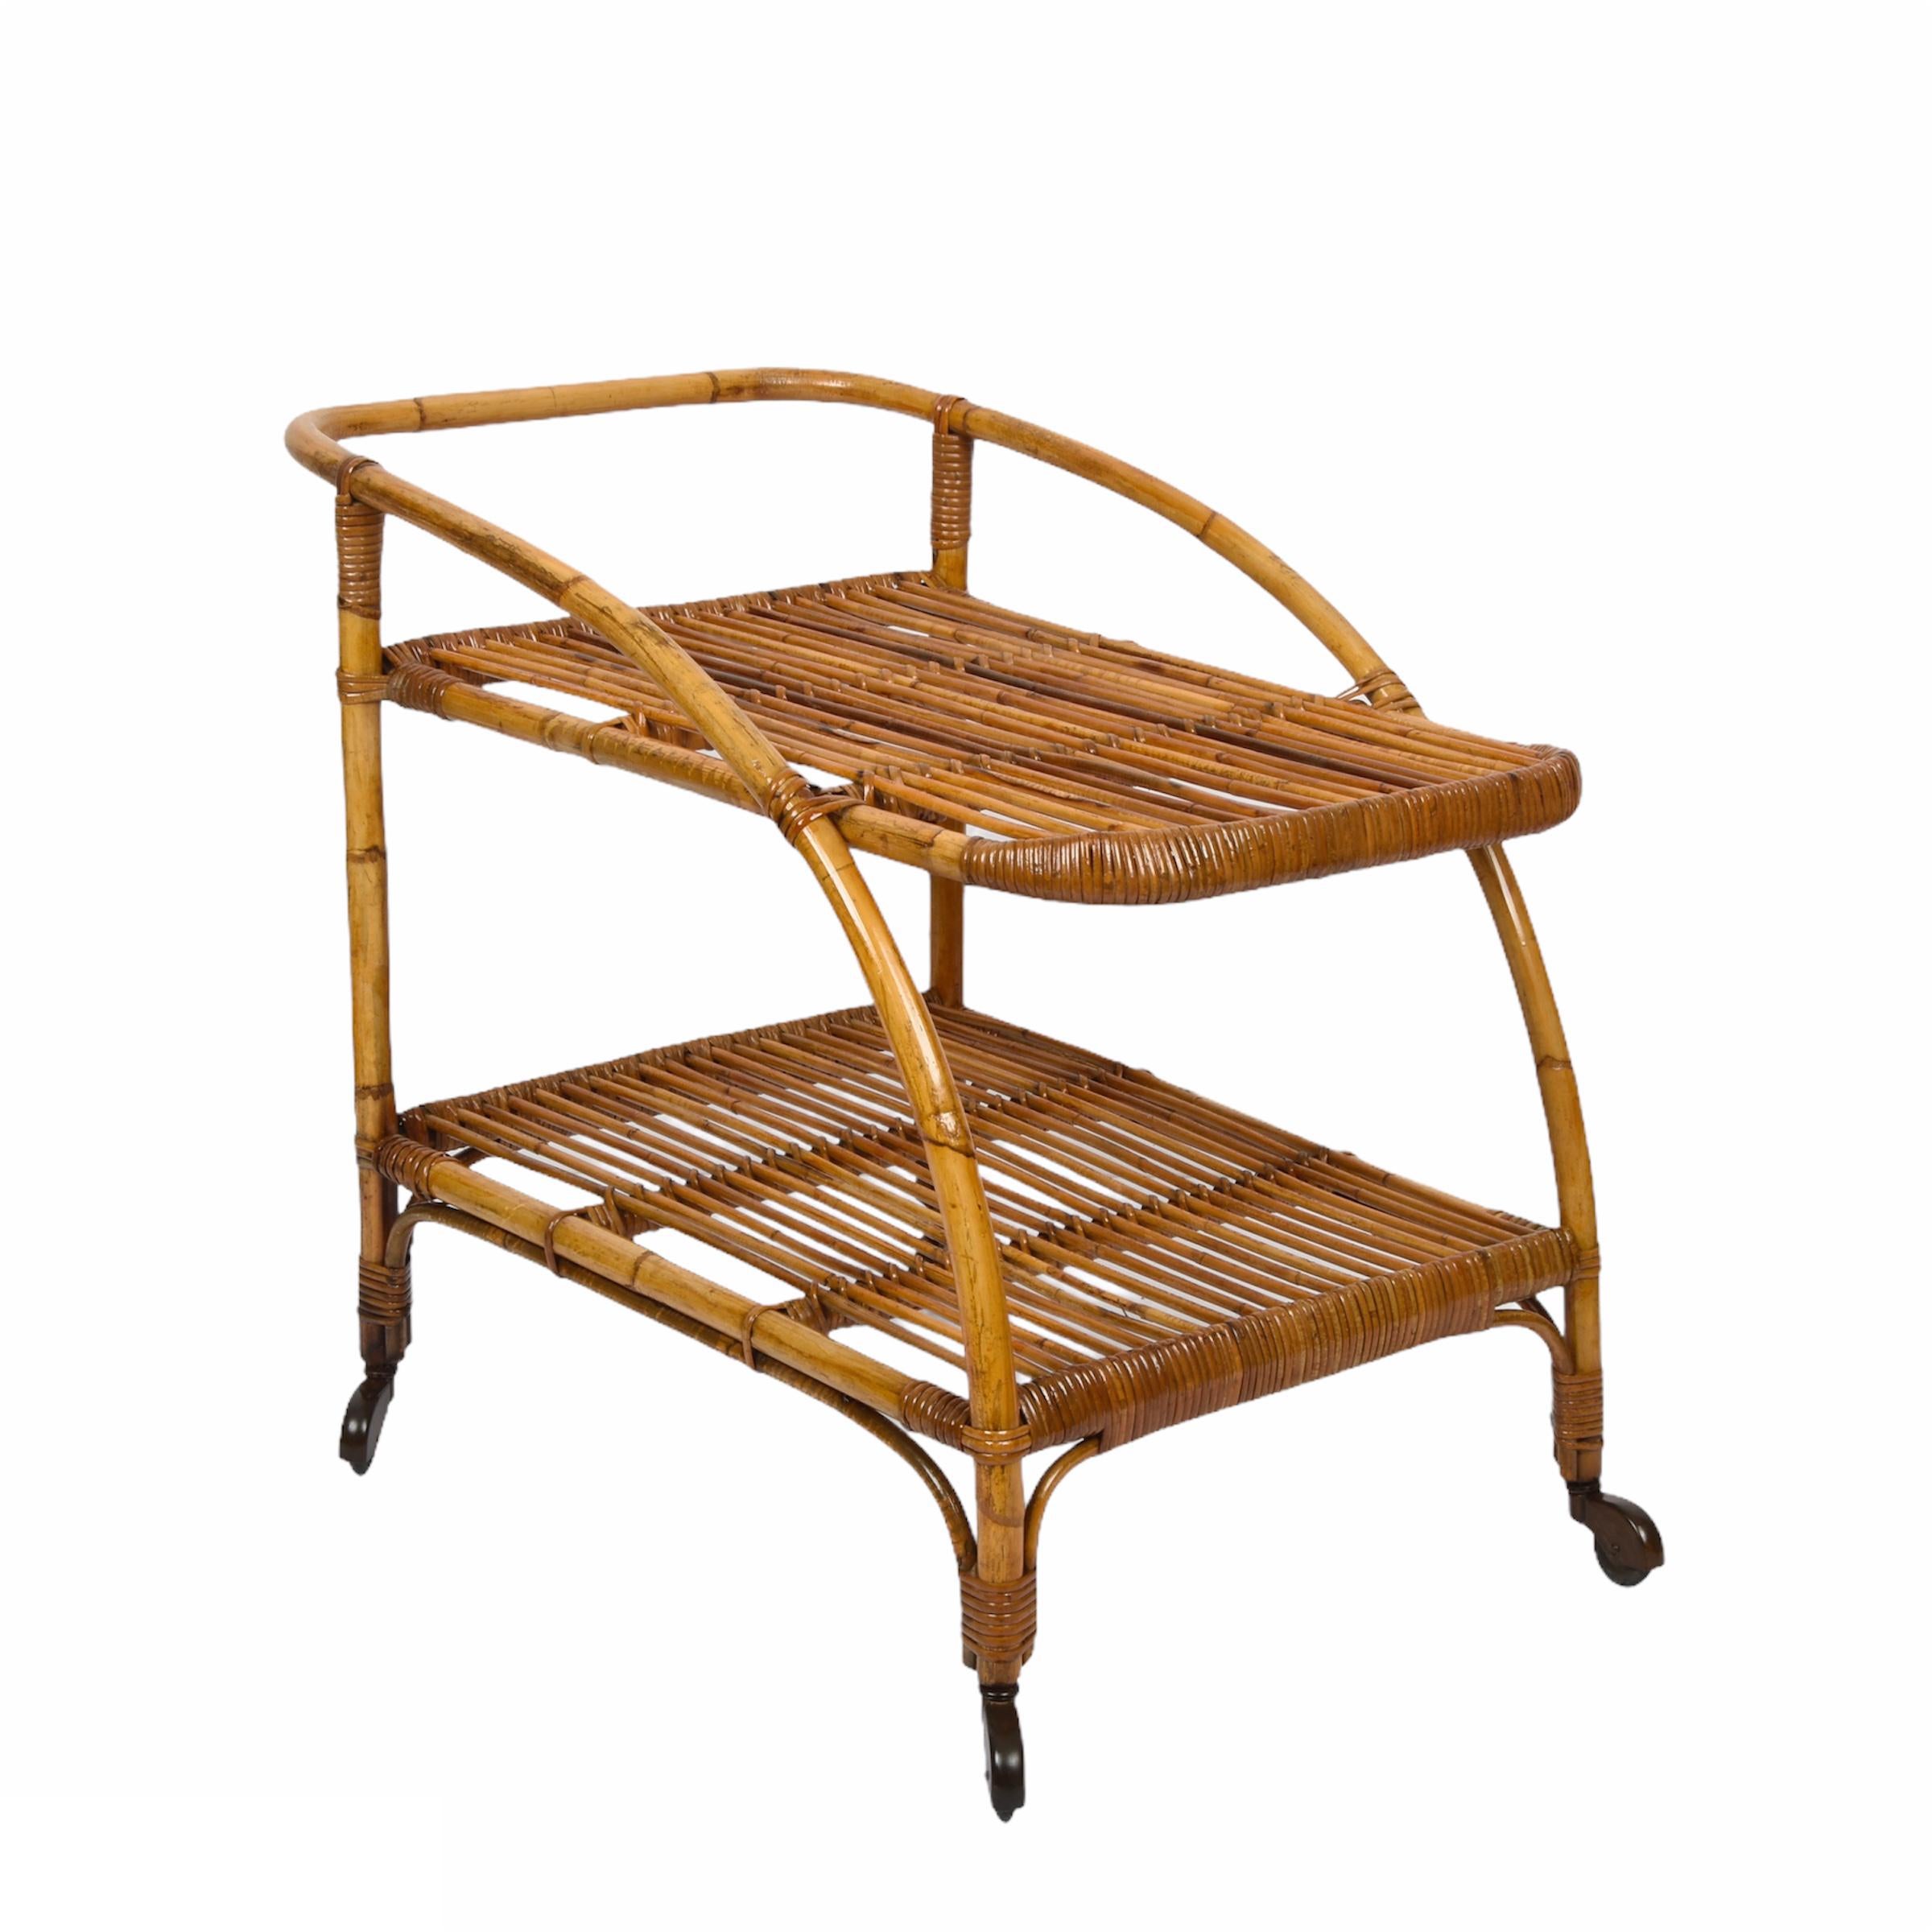 Mid-20th Century Midcentury Bamboo and Rattan Italian Serving Bar Cart Trolley with Wheels, 1950s